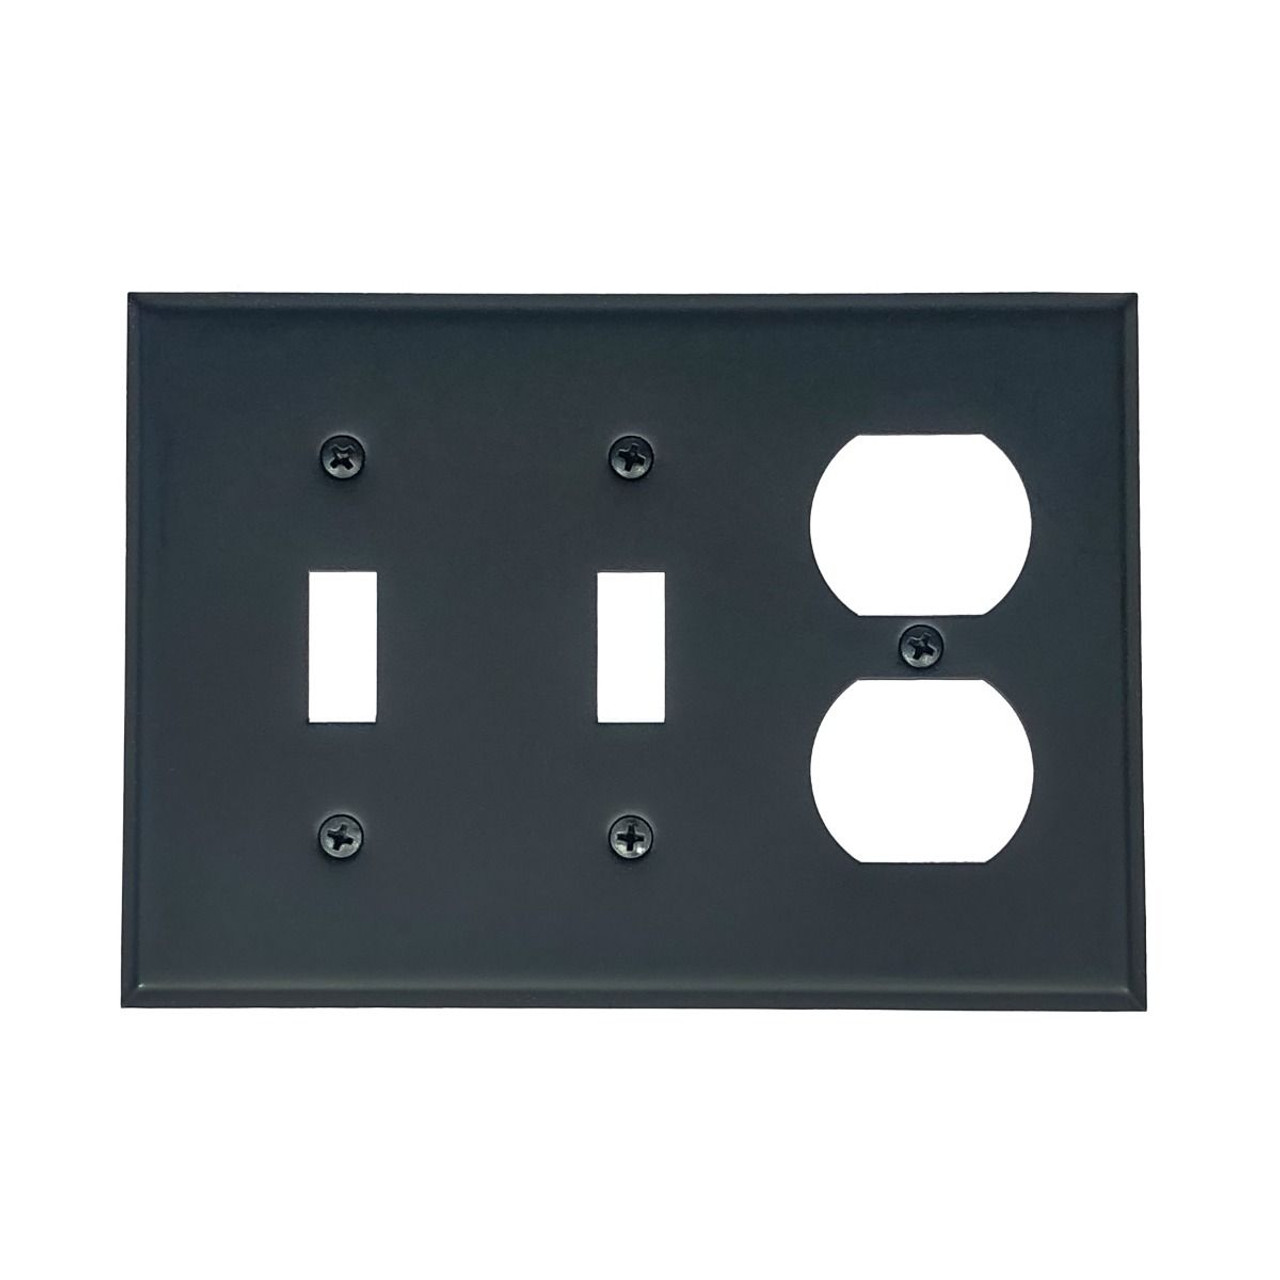 2 Toggle & Duplex Wall Plate AW7BP